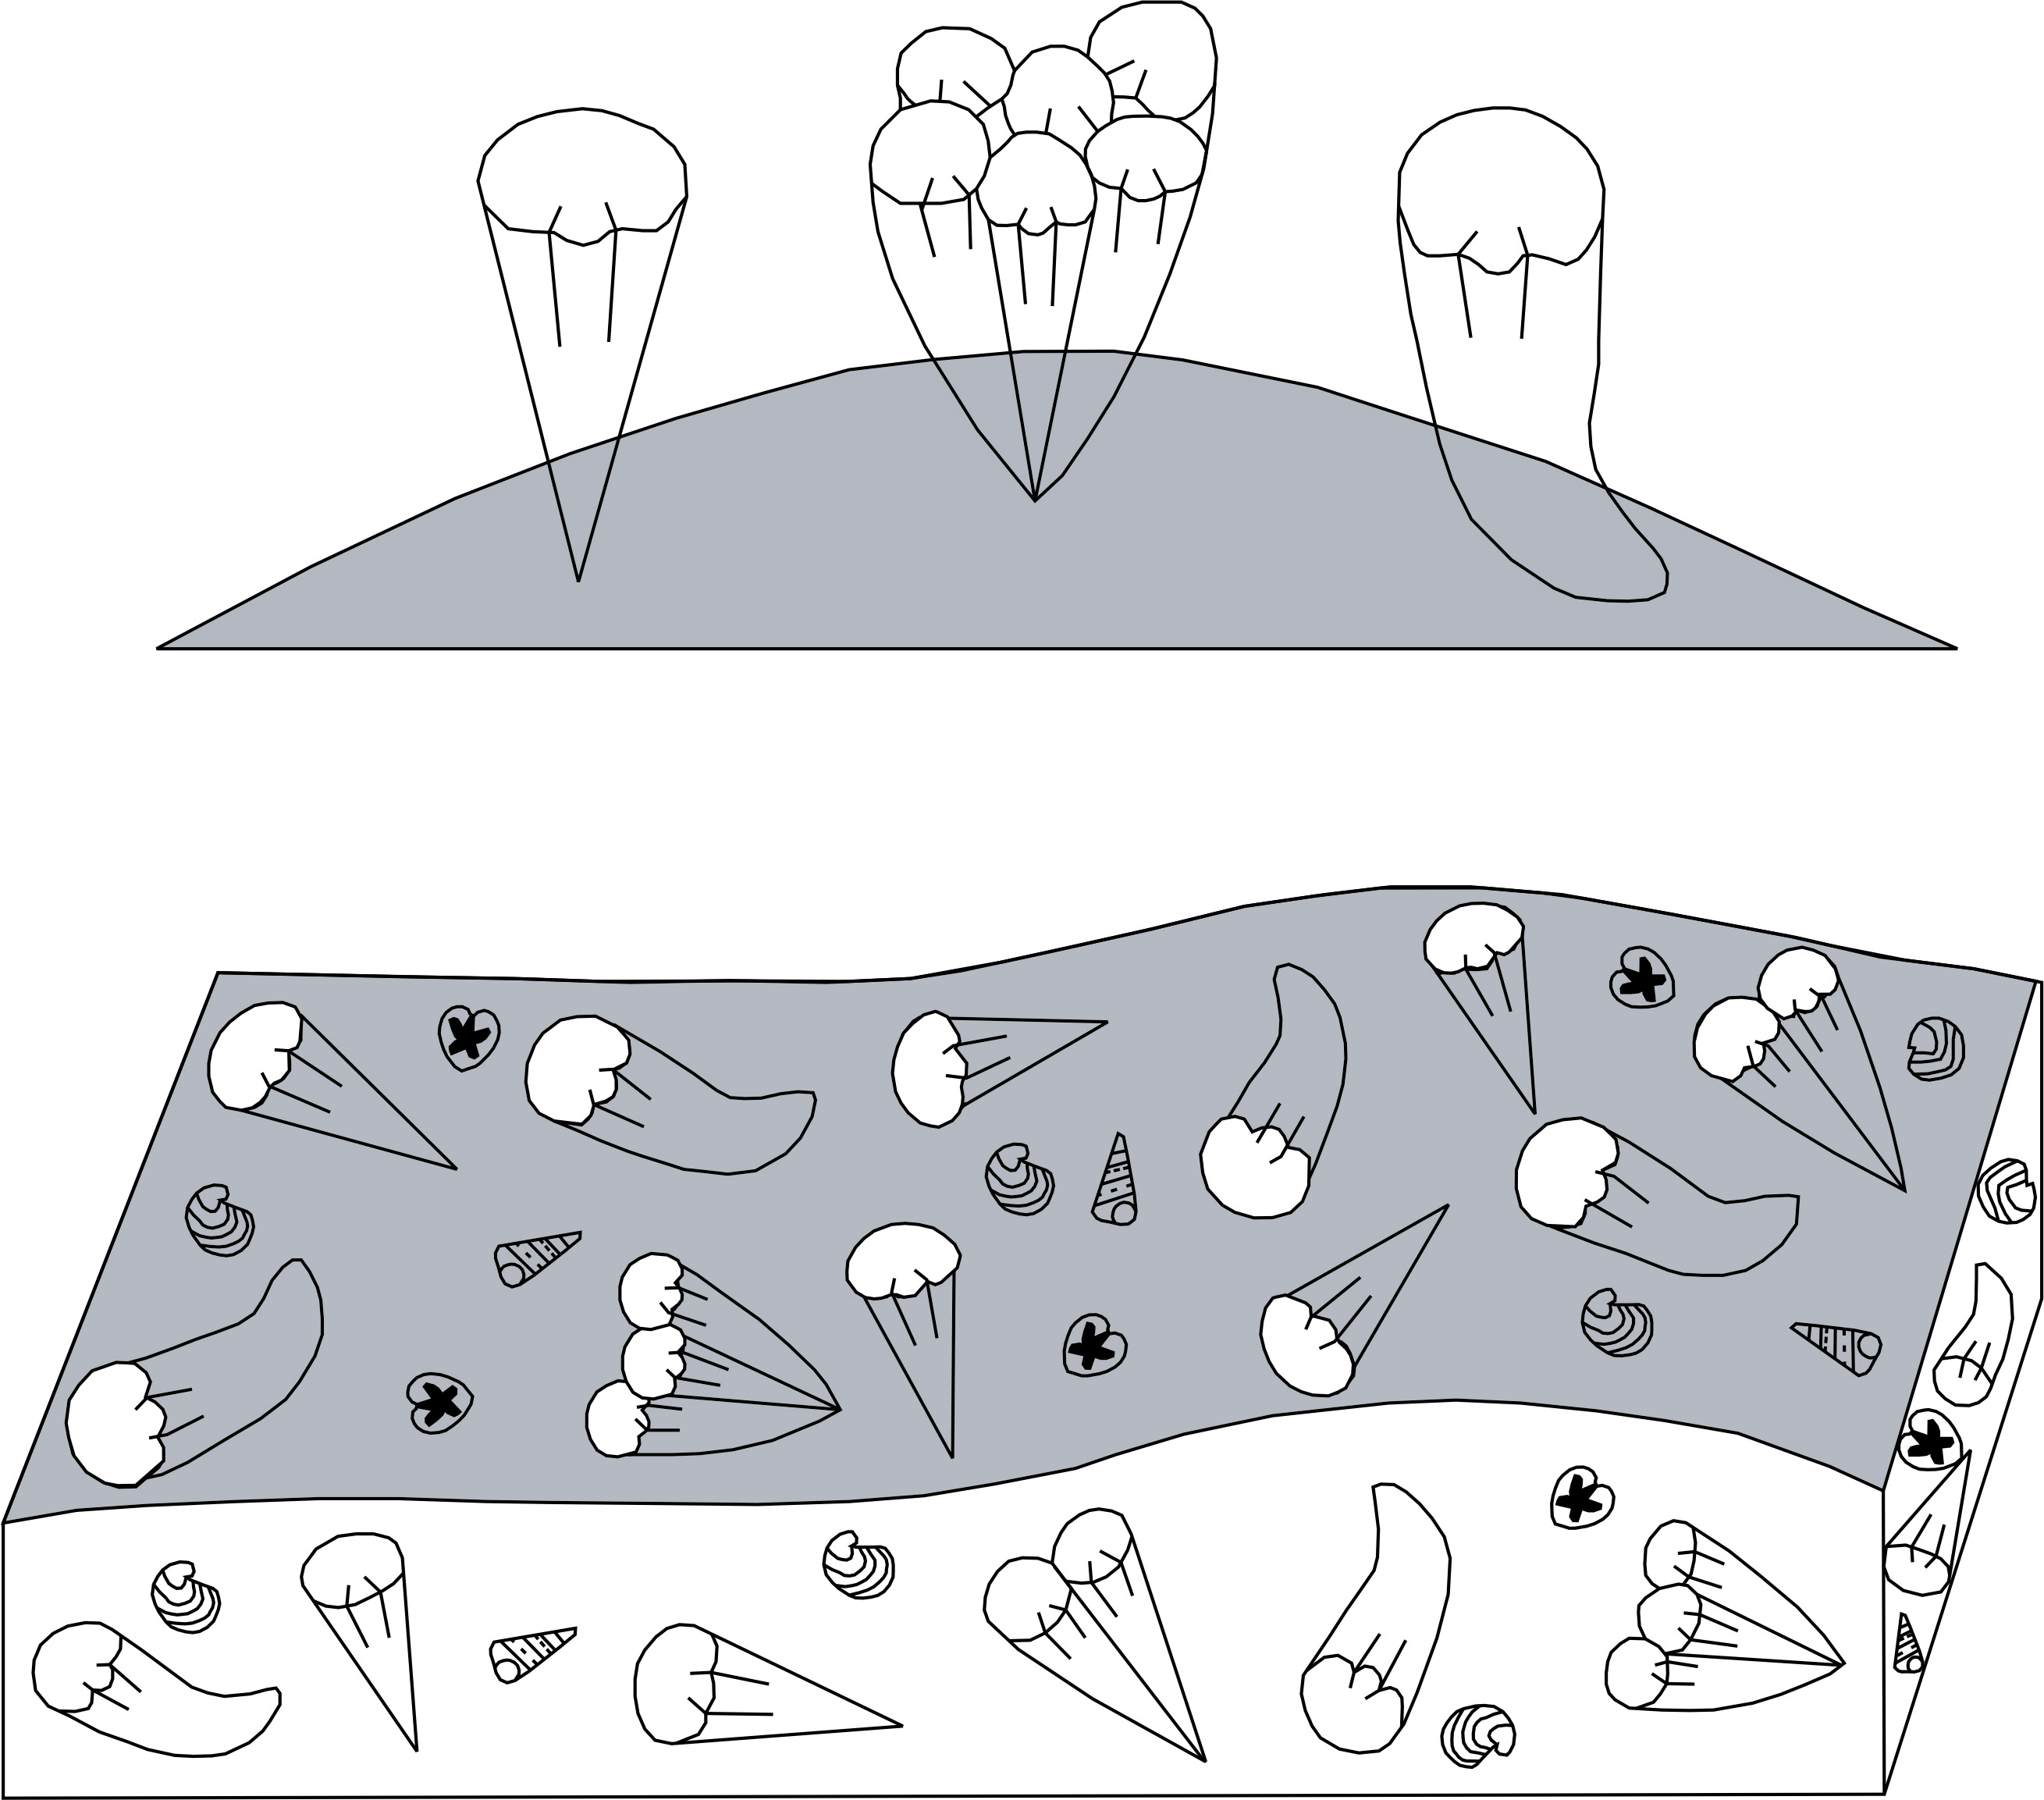 Simplified depictions of a rudist colony (above) and a rudist thanatocoenosis (below)